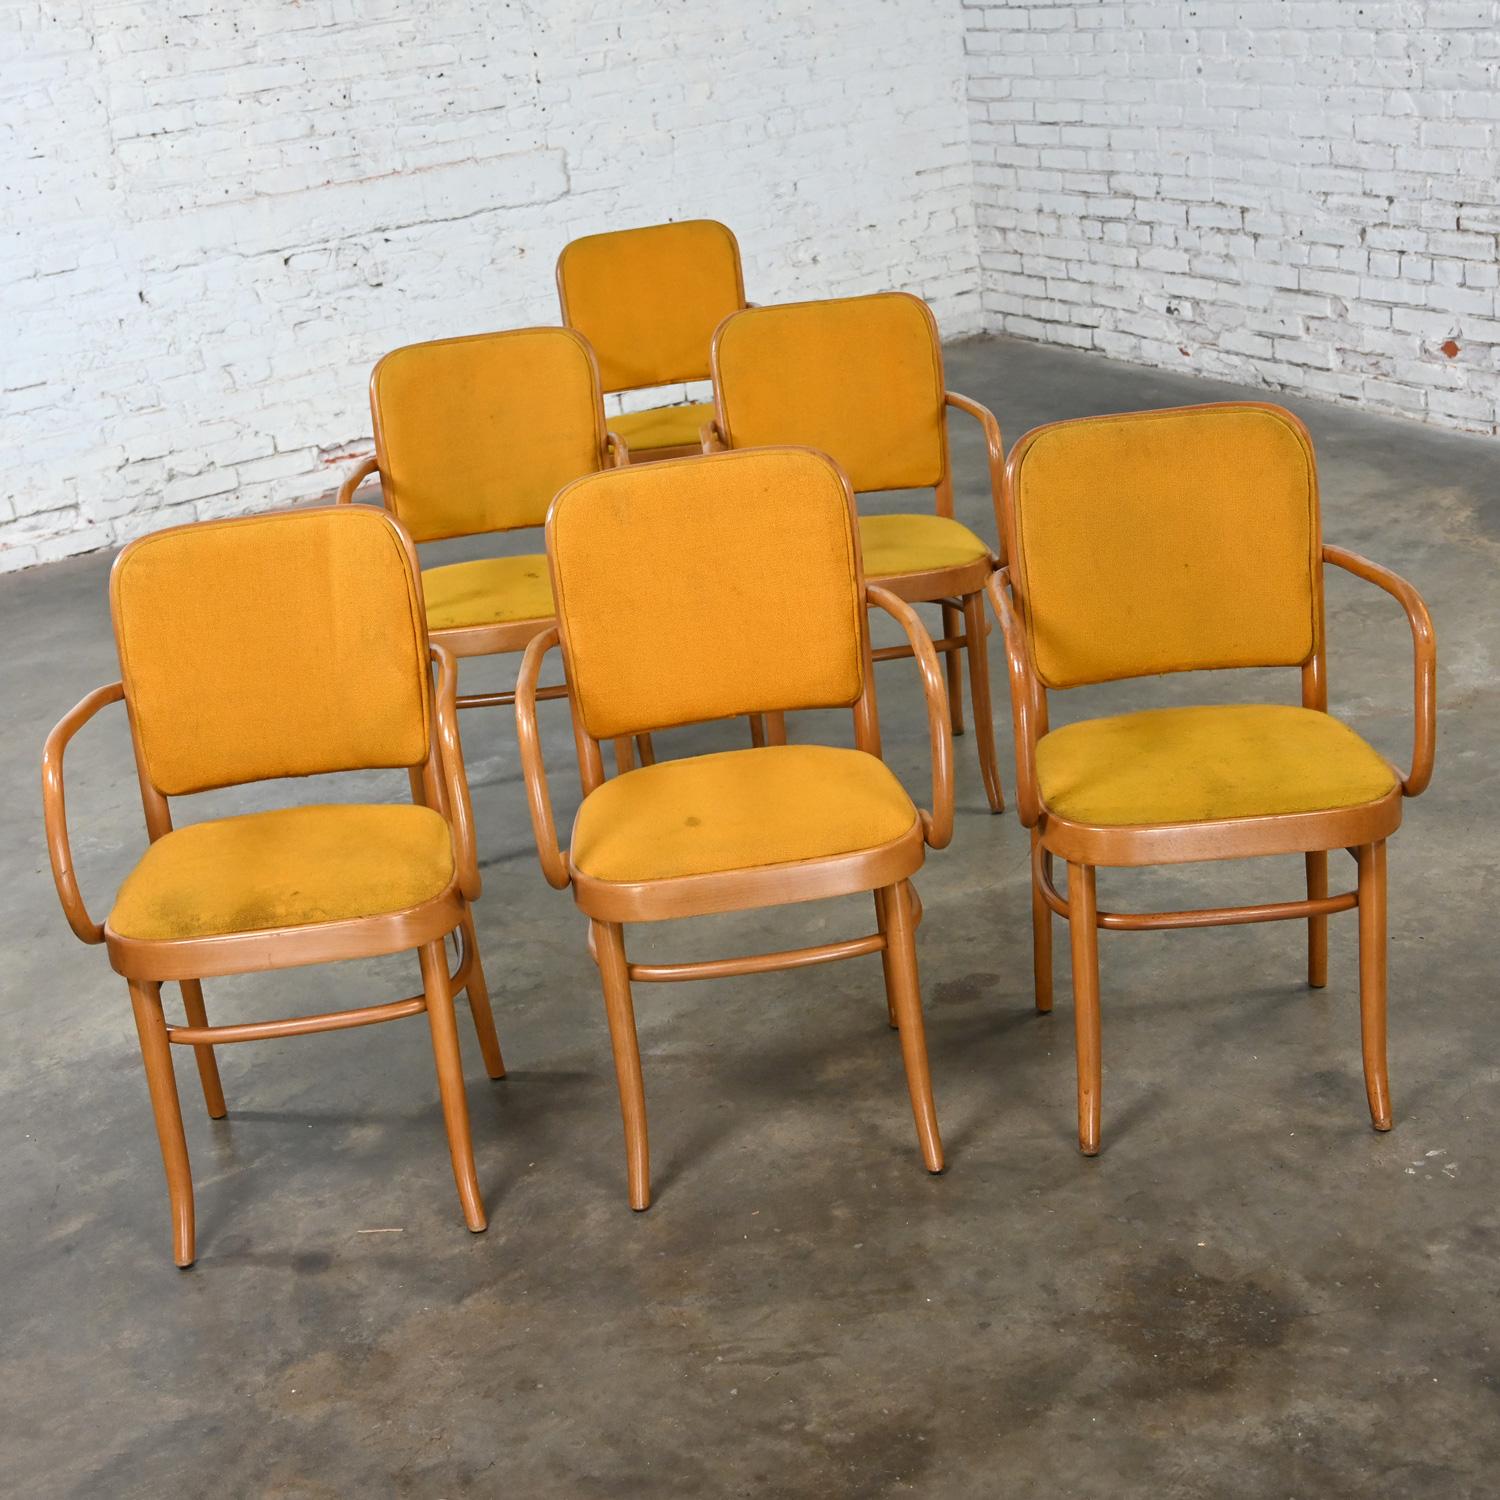 Wonderful vintage Bauhaus beech bentwood frame Thonet Josef Hoffman Prague 811 style armed dining chairs by Falcon Products Inc., Set of 6. Beautiful condition, keeping in mind that these are vintage and not new so will have signs of use and wear